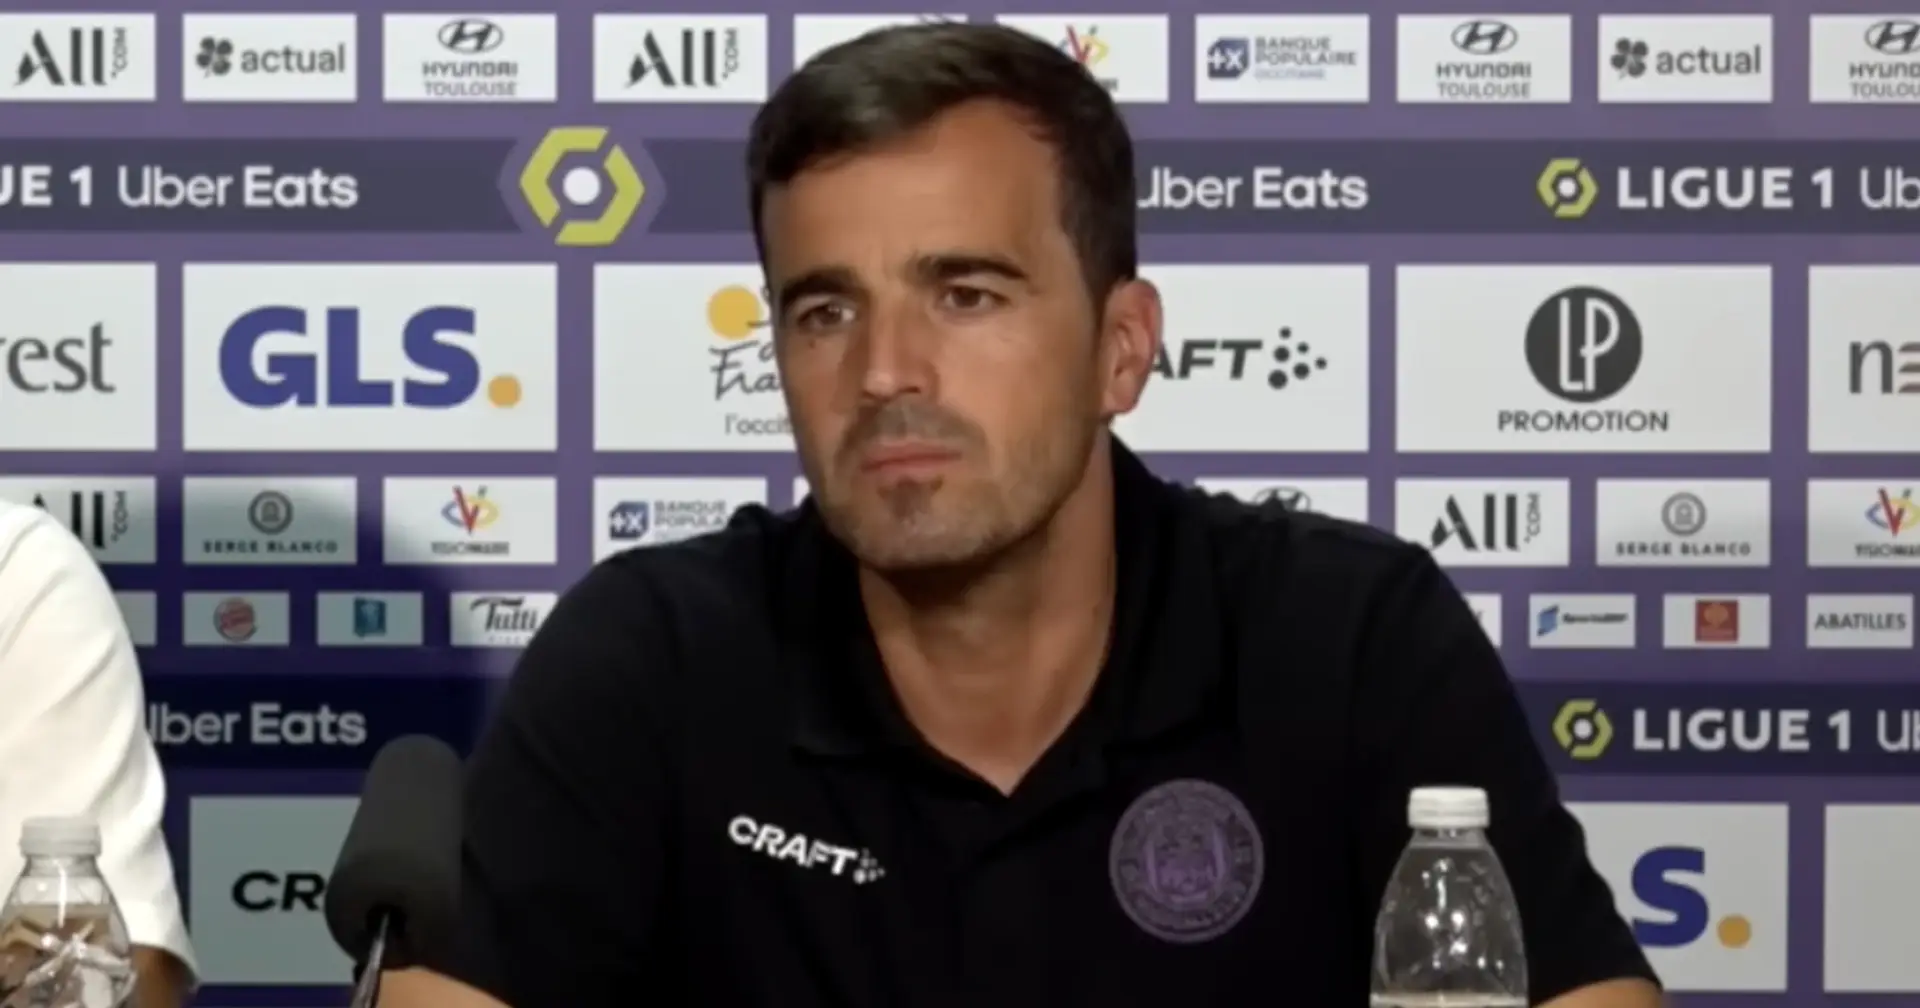 Toulouse boss vows to make Liverpool 'suffer' in Europa League clash